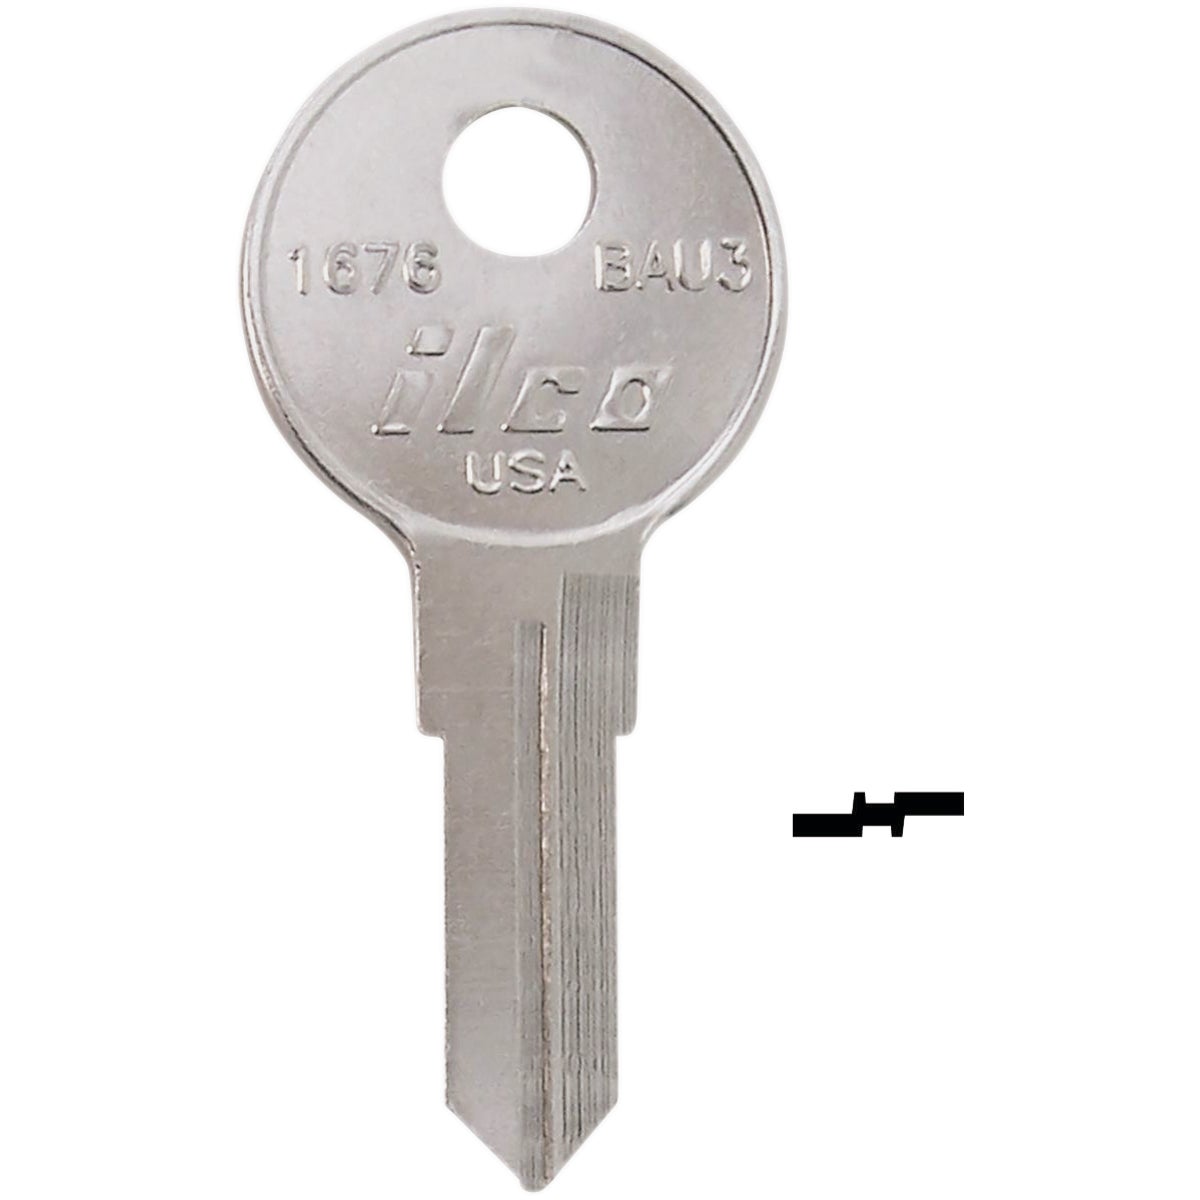 ILCO Bauer BRS Key Blank 1676 (10-Pack)